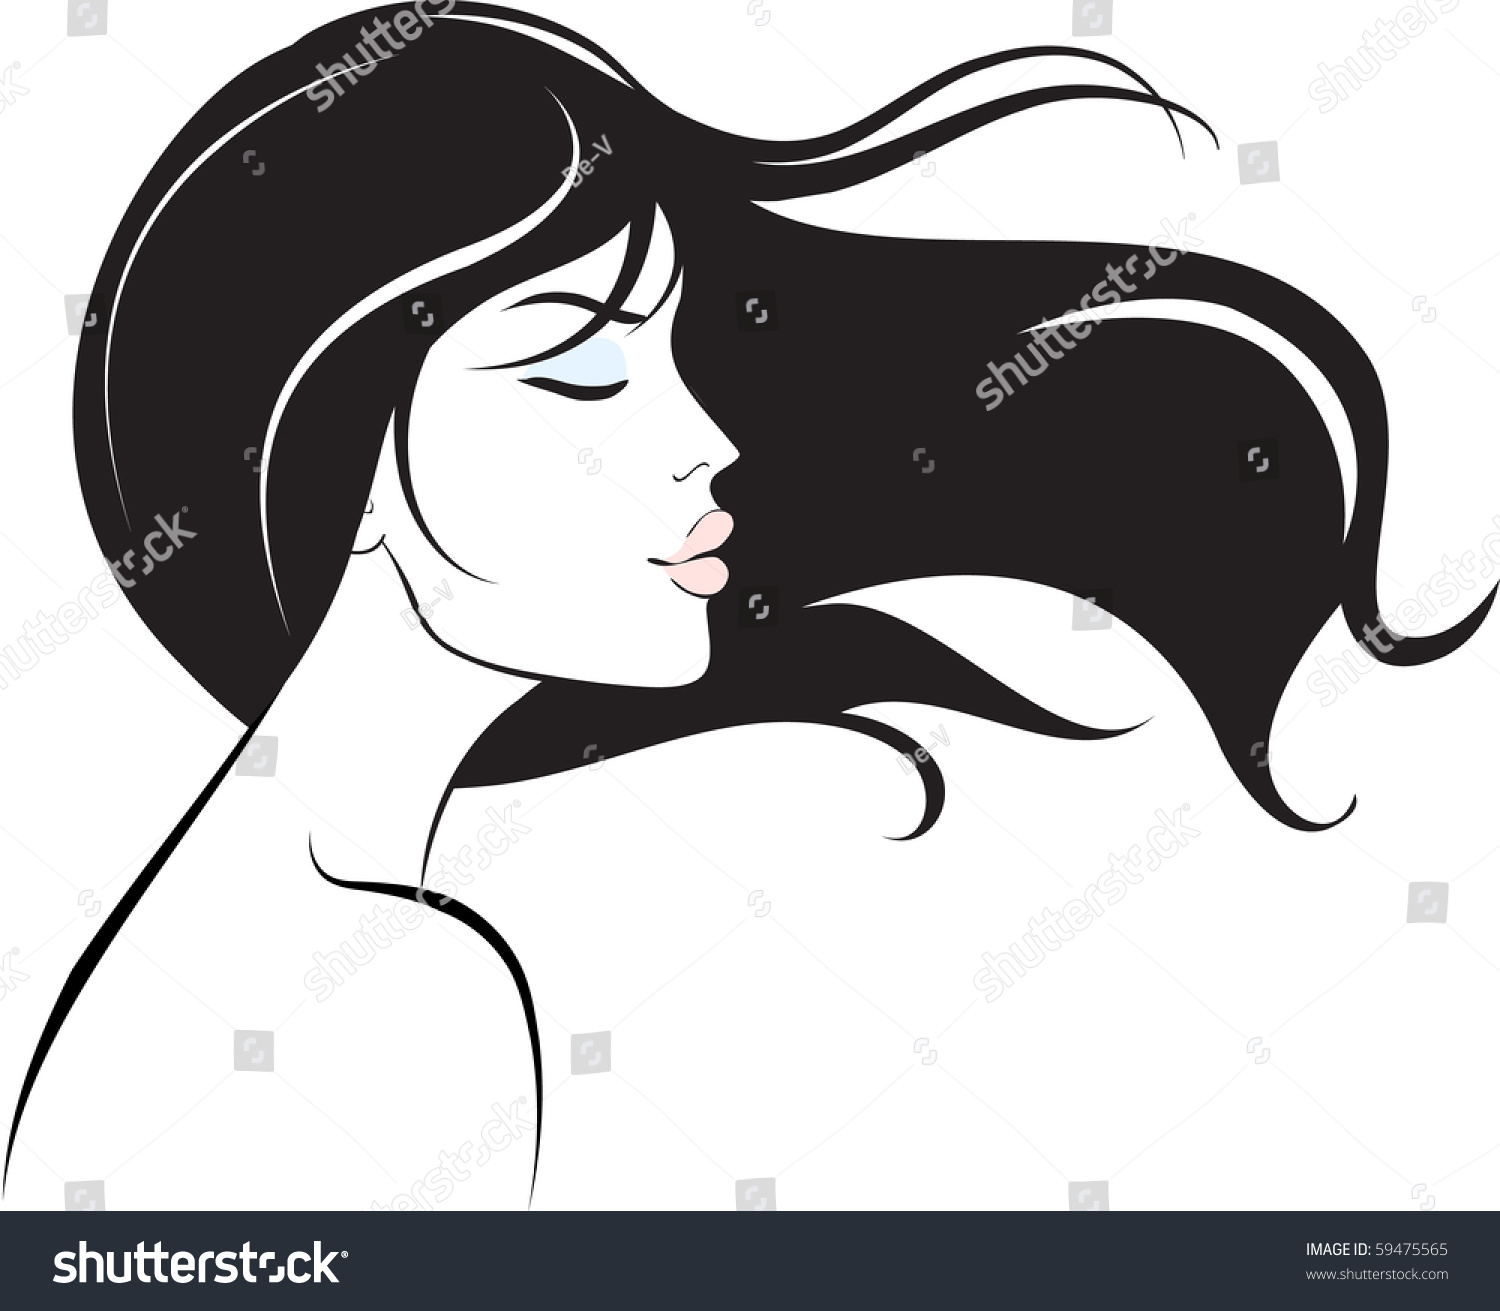 Woman Face With Long Black Hair Stock Vector 59475565 Shutterstock 0103